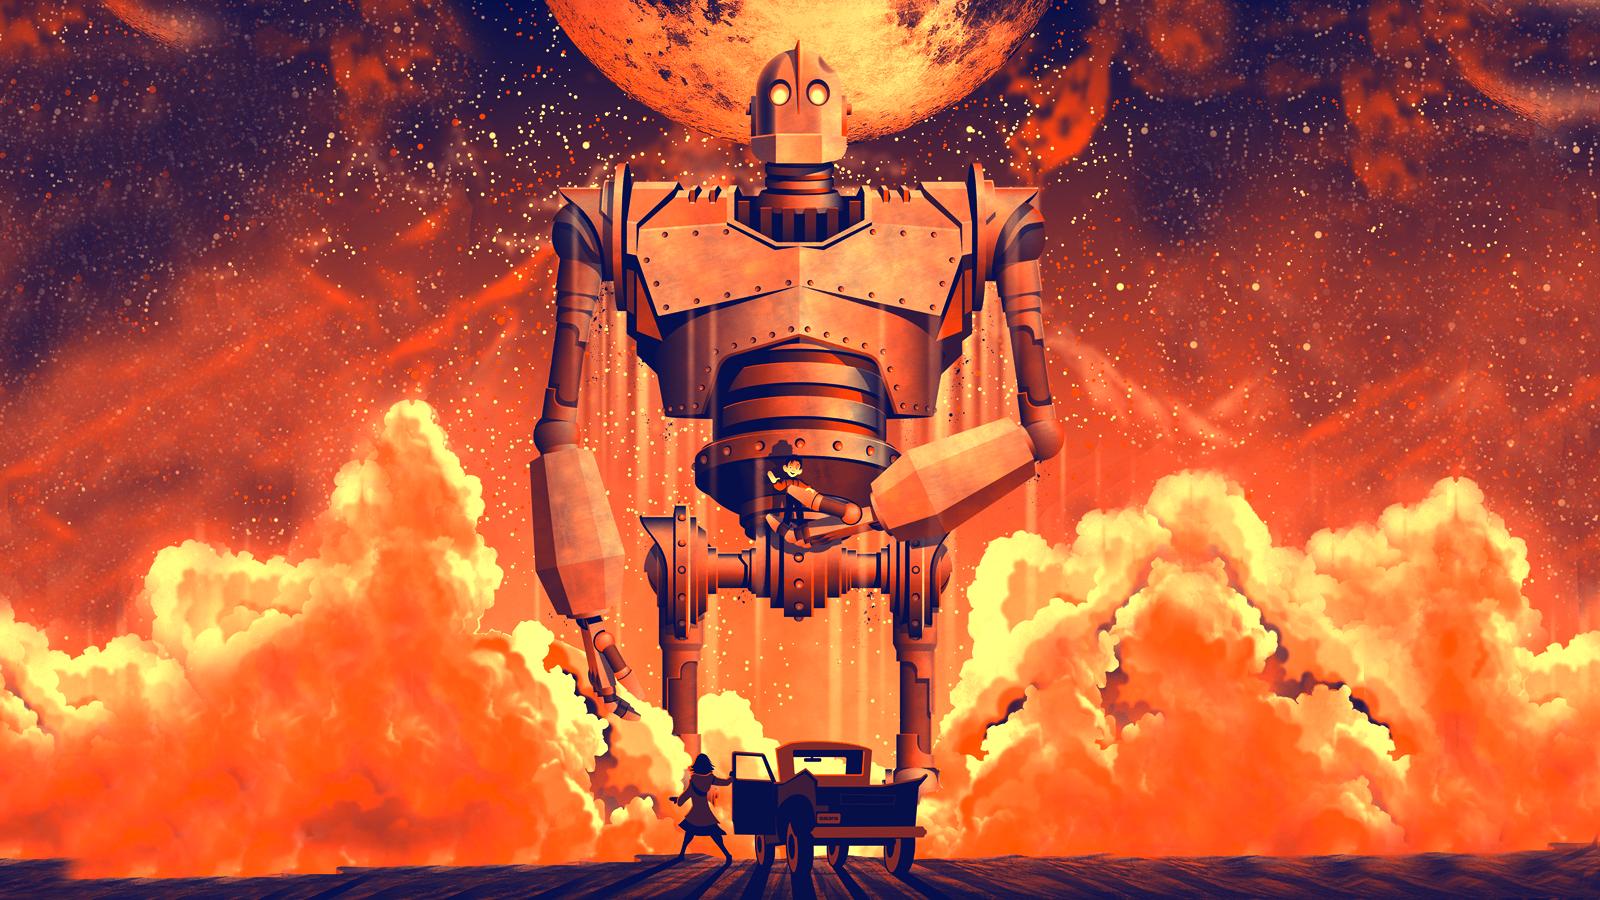 the iron giant wallpaper,fictional character,cg artwork,explosion,animation,illustration